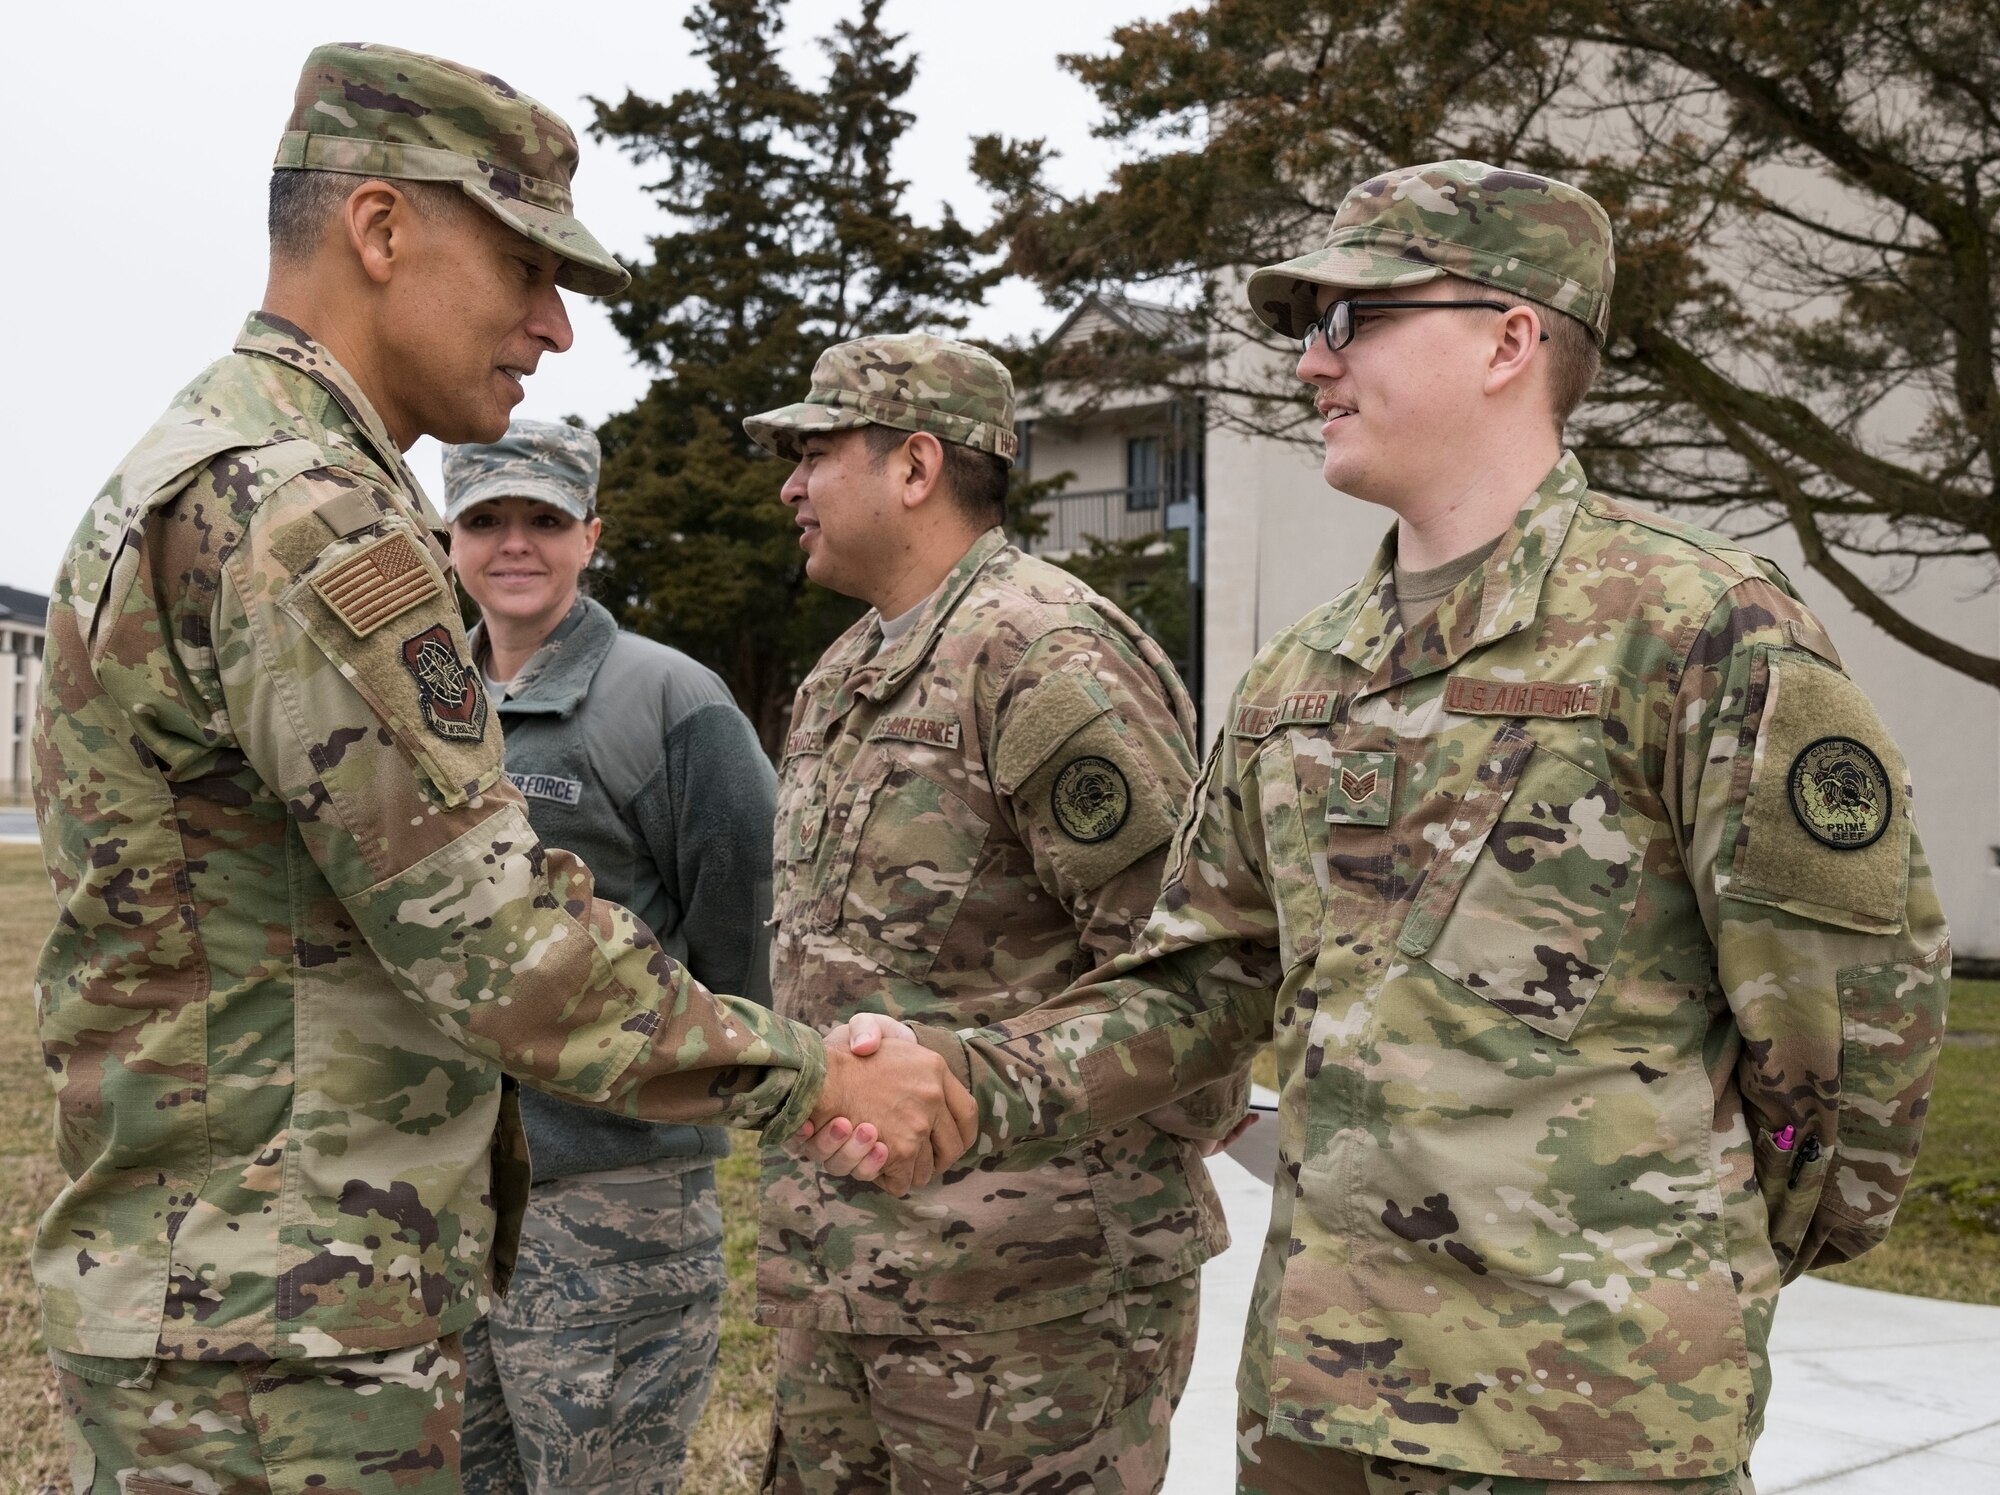 U.S. Air Force Chief Master Sgt. Terrence Greene, command chief of Air Mobility Command, Scott Air Force Base, Ill., shakes hands with Staff Sgt. Anthony Kieswetter, 436th Civil Engineer Squadron Airman dormitory leader, Feb. 7, 2019, at Dover Air Force Base, Del. Also pictured, Master Sgt. Amber Lawrence, unaccompanied housing supervisor, and Staff Sgt. James Hernandez, Airman dormitory leader, both from the 436th CES, informed Greene that Dormitory 401 is the oldest un-renovated dorm on the base. (U.S. Air Force photo by Roland Balik)